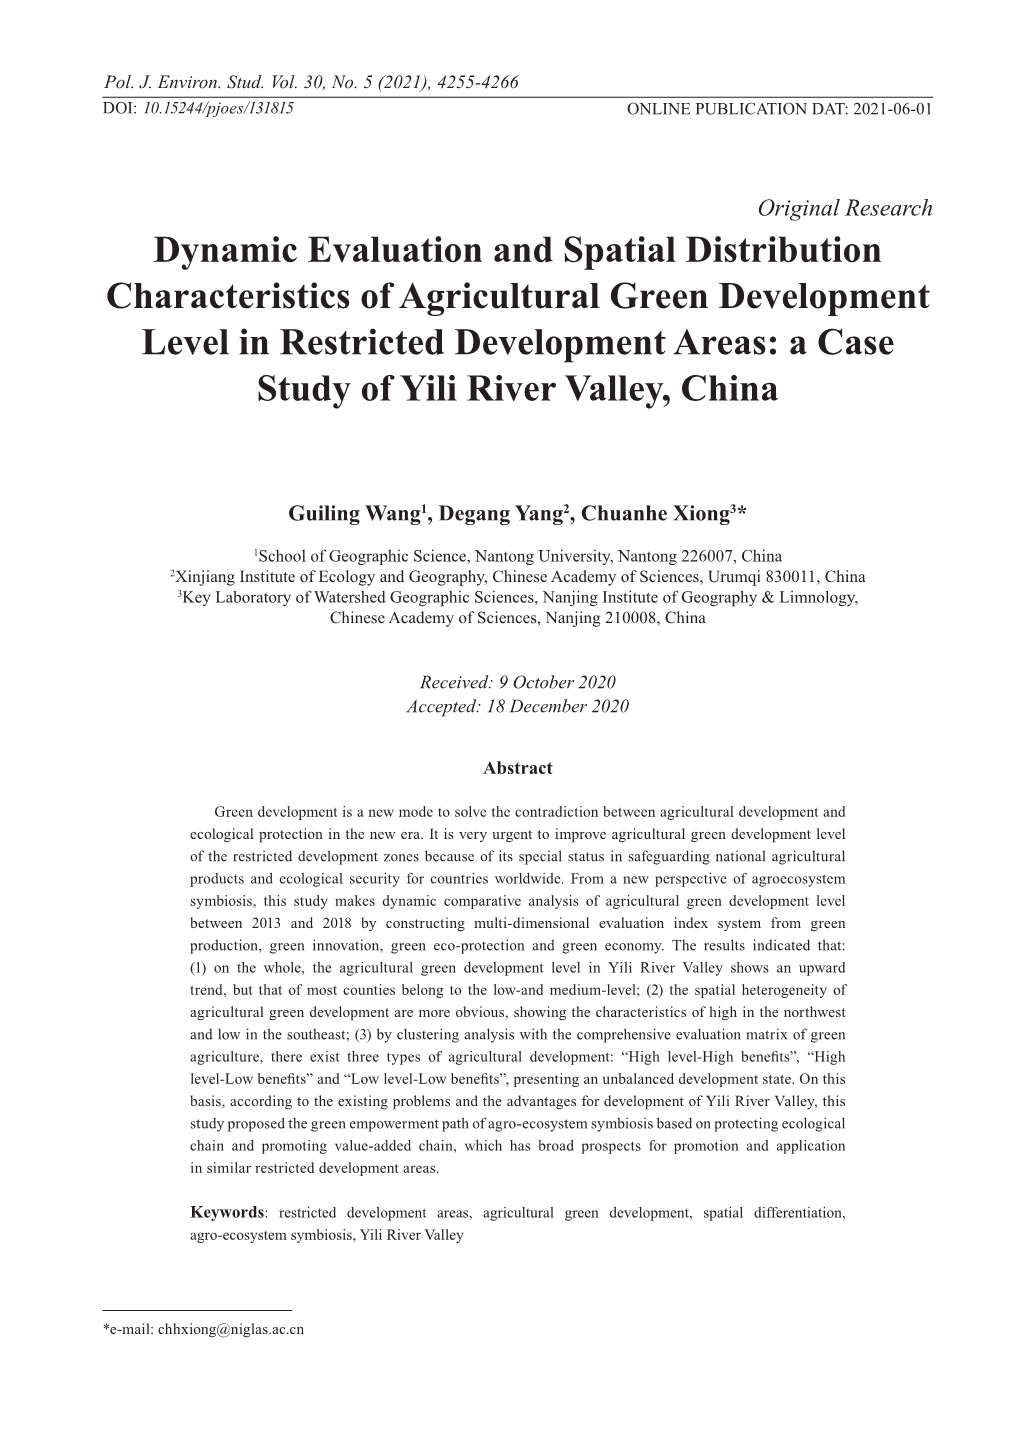 Dynamic Evaluation and Spatial Distribution Characteristics Of